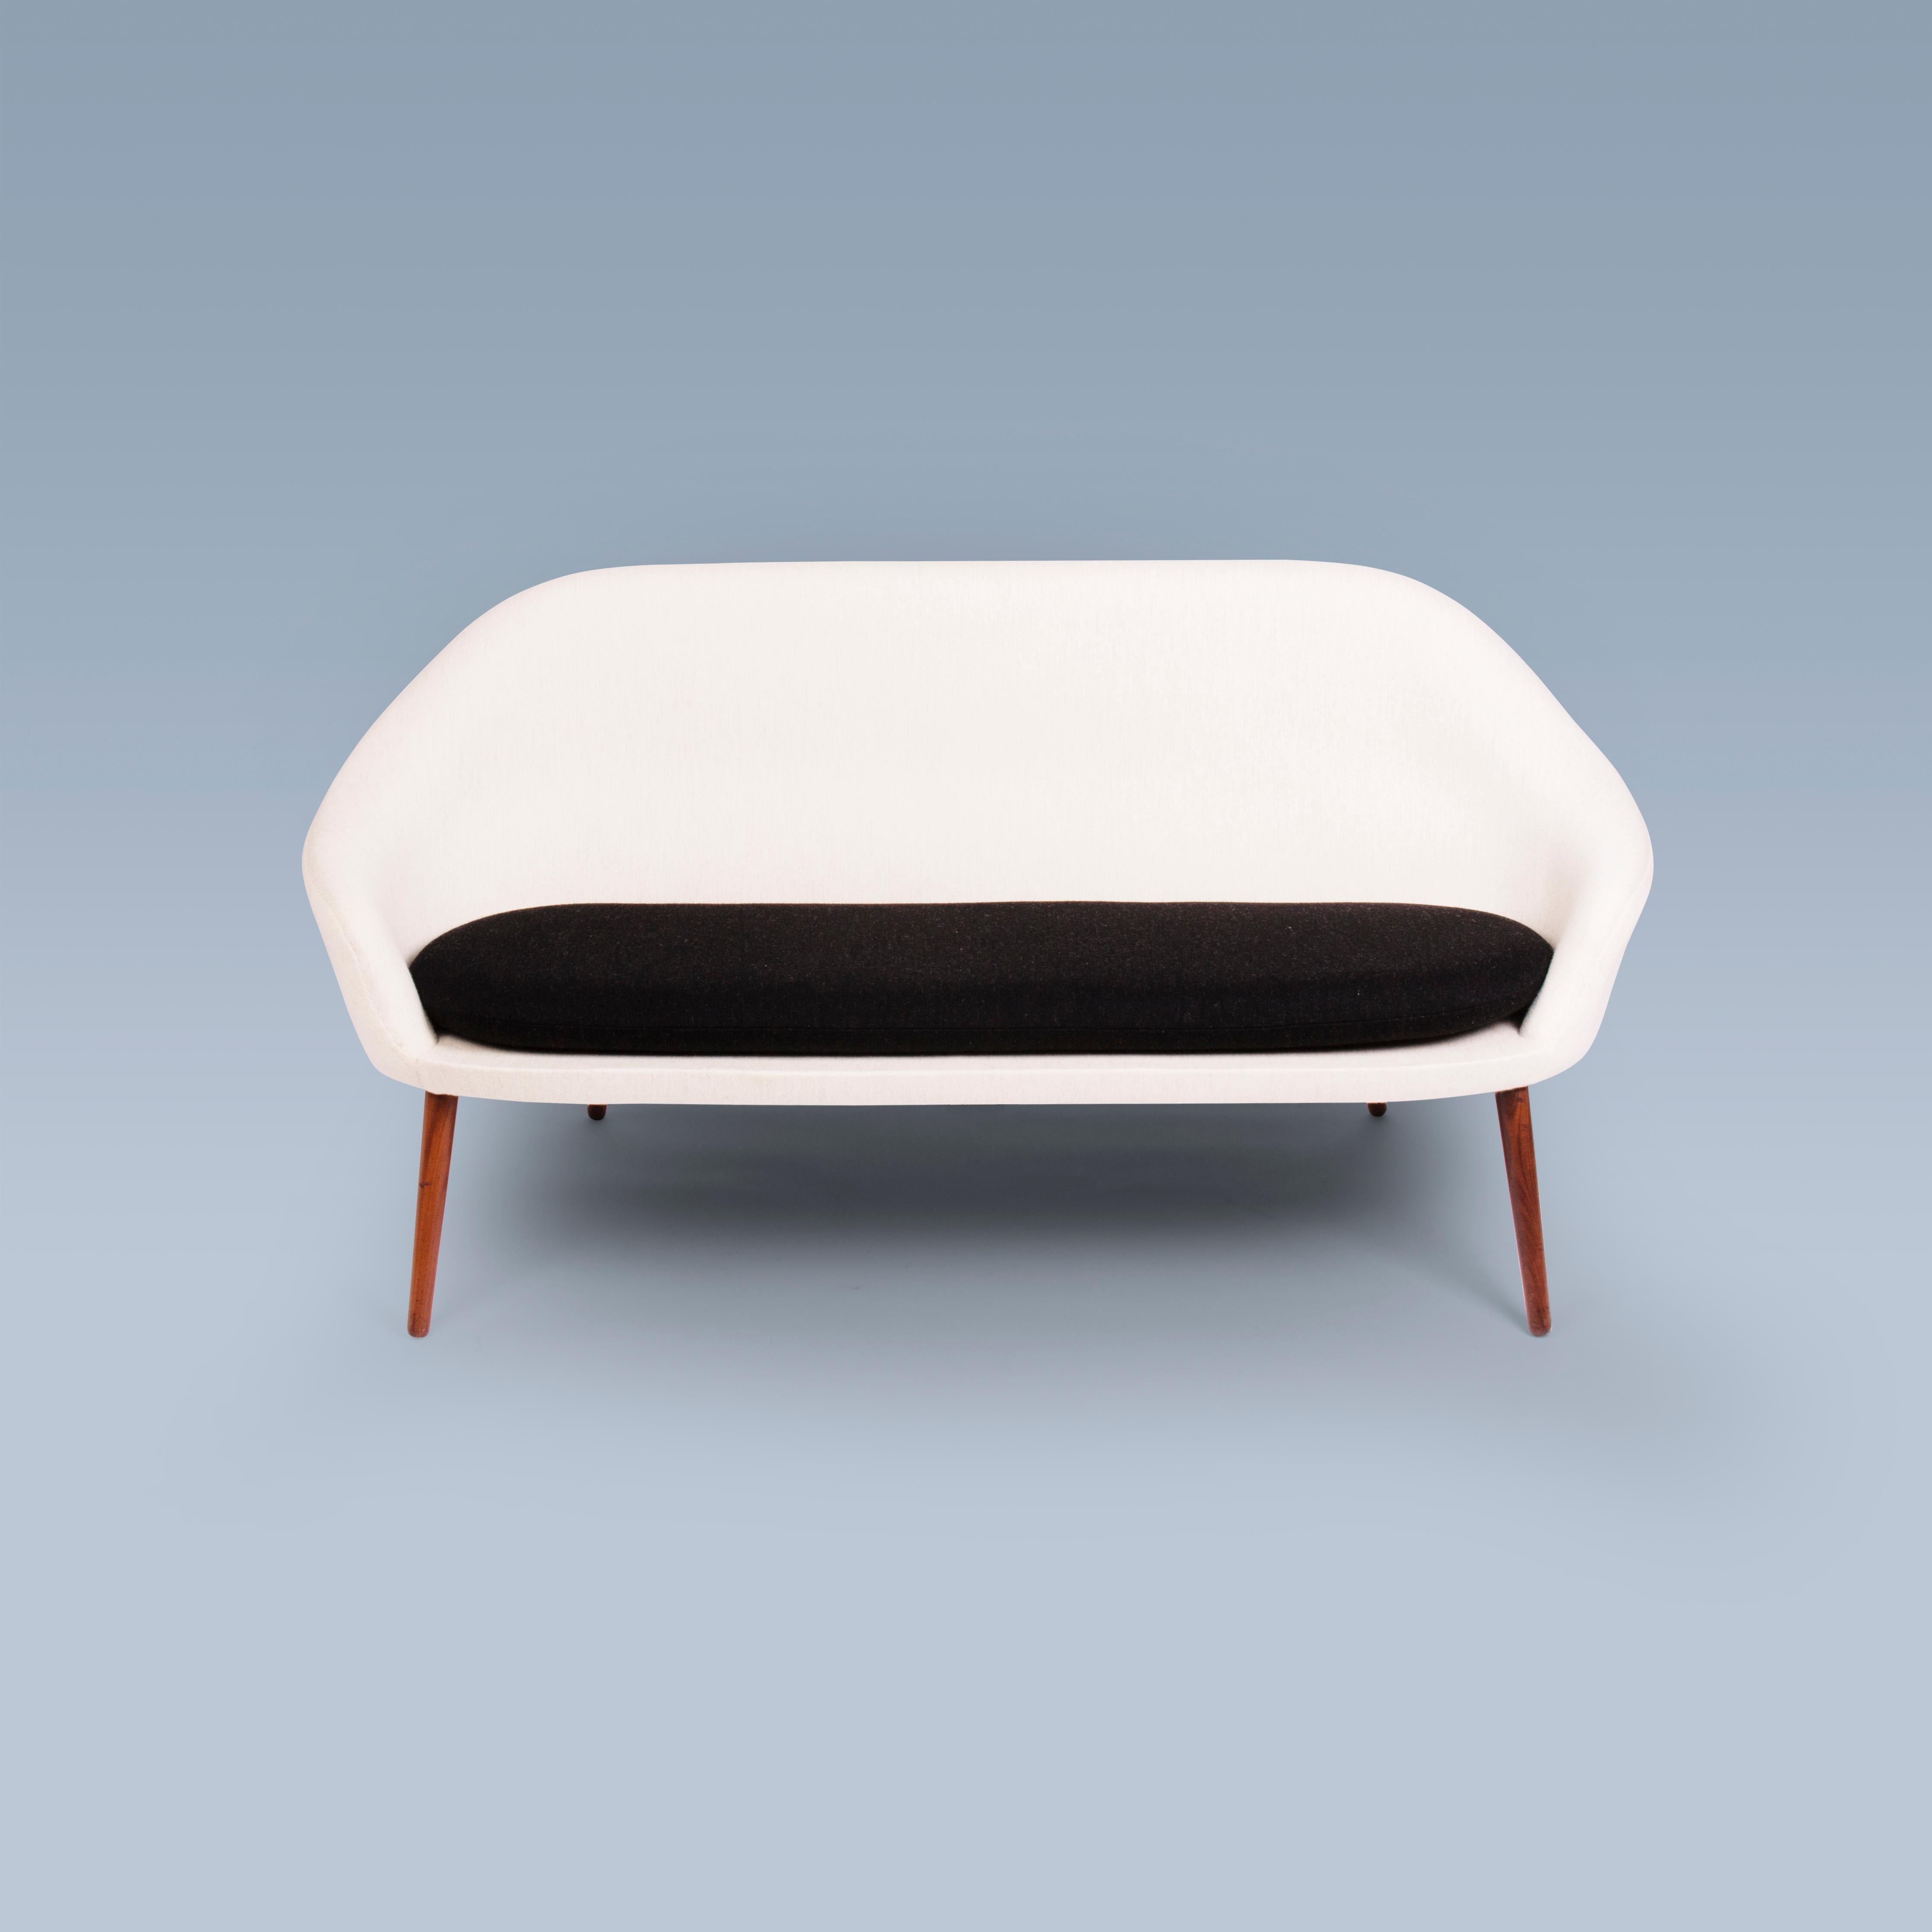 This sofa with a large seat cushion was designed in 1956 by Hans Olsen (1919-1992). The sofa is model number 187. It is upholstered with white and black Savak wool by Gabriel. Its legs are of stained wood.
The sofa is executed and marked by Bramin